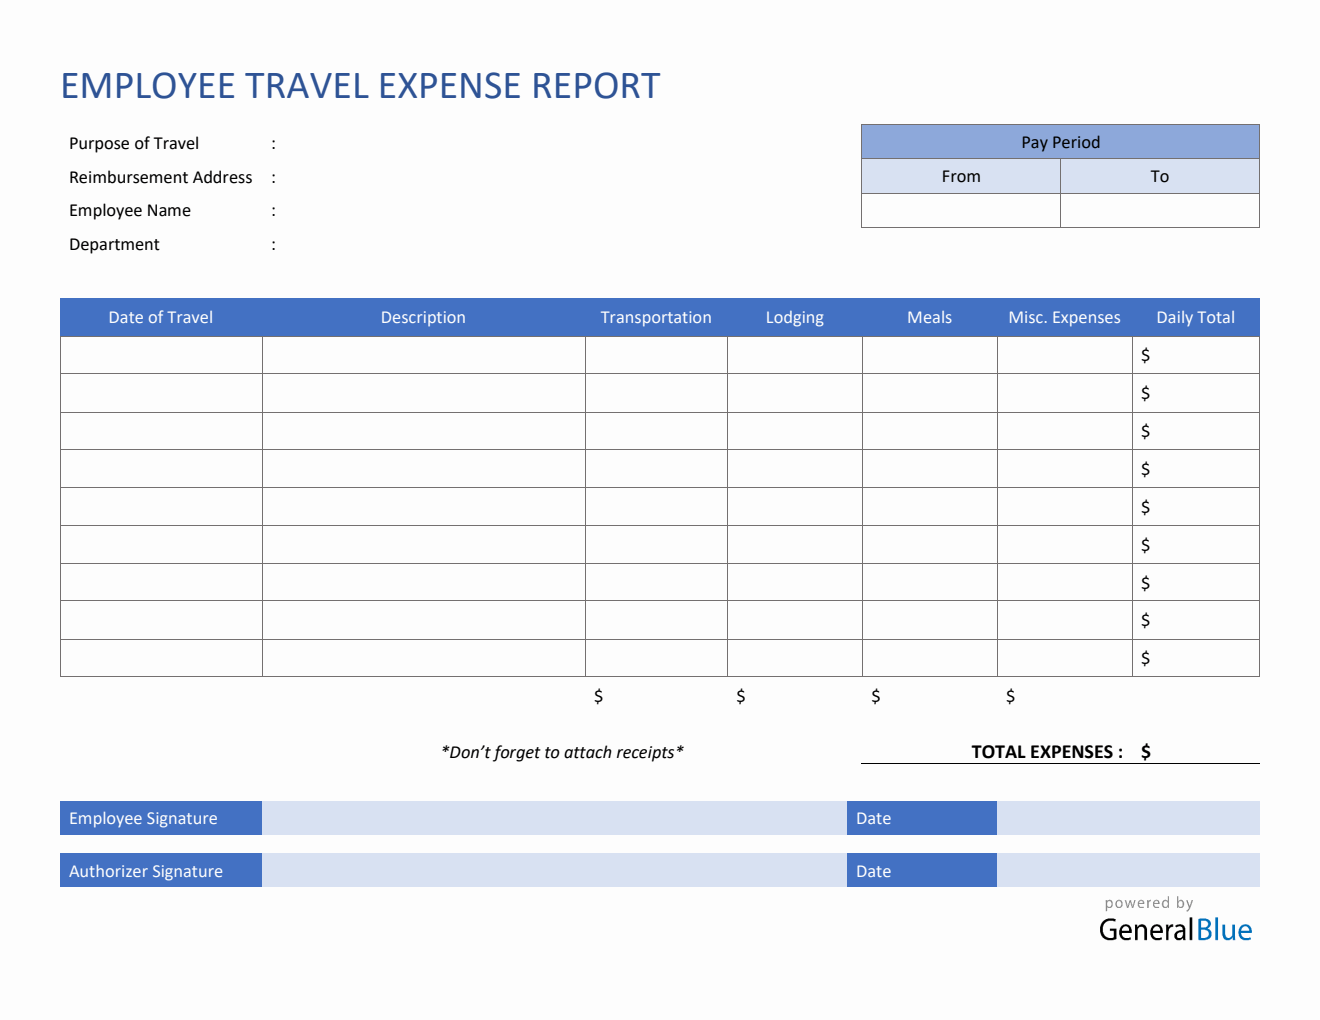 Employee Travel Expense Report Template in PDF